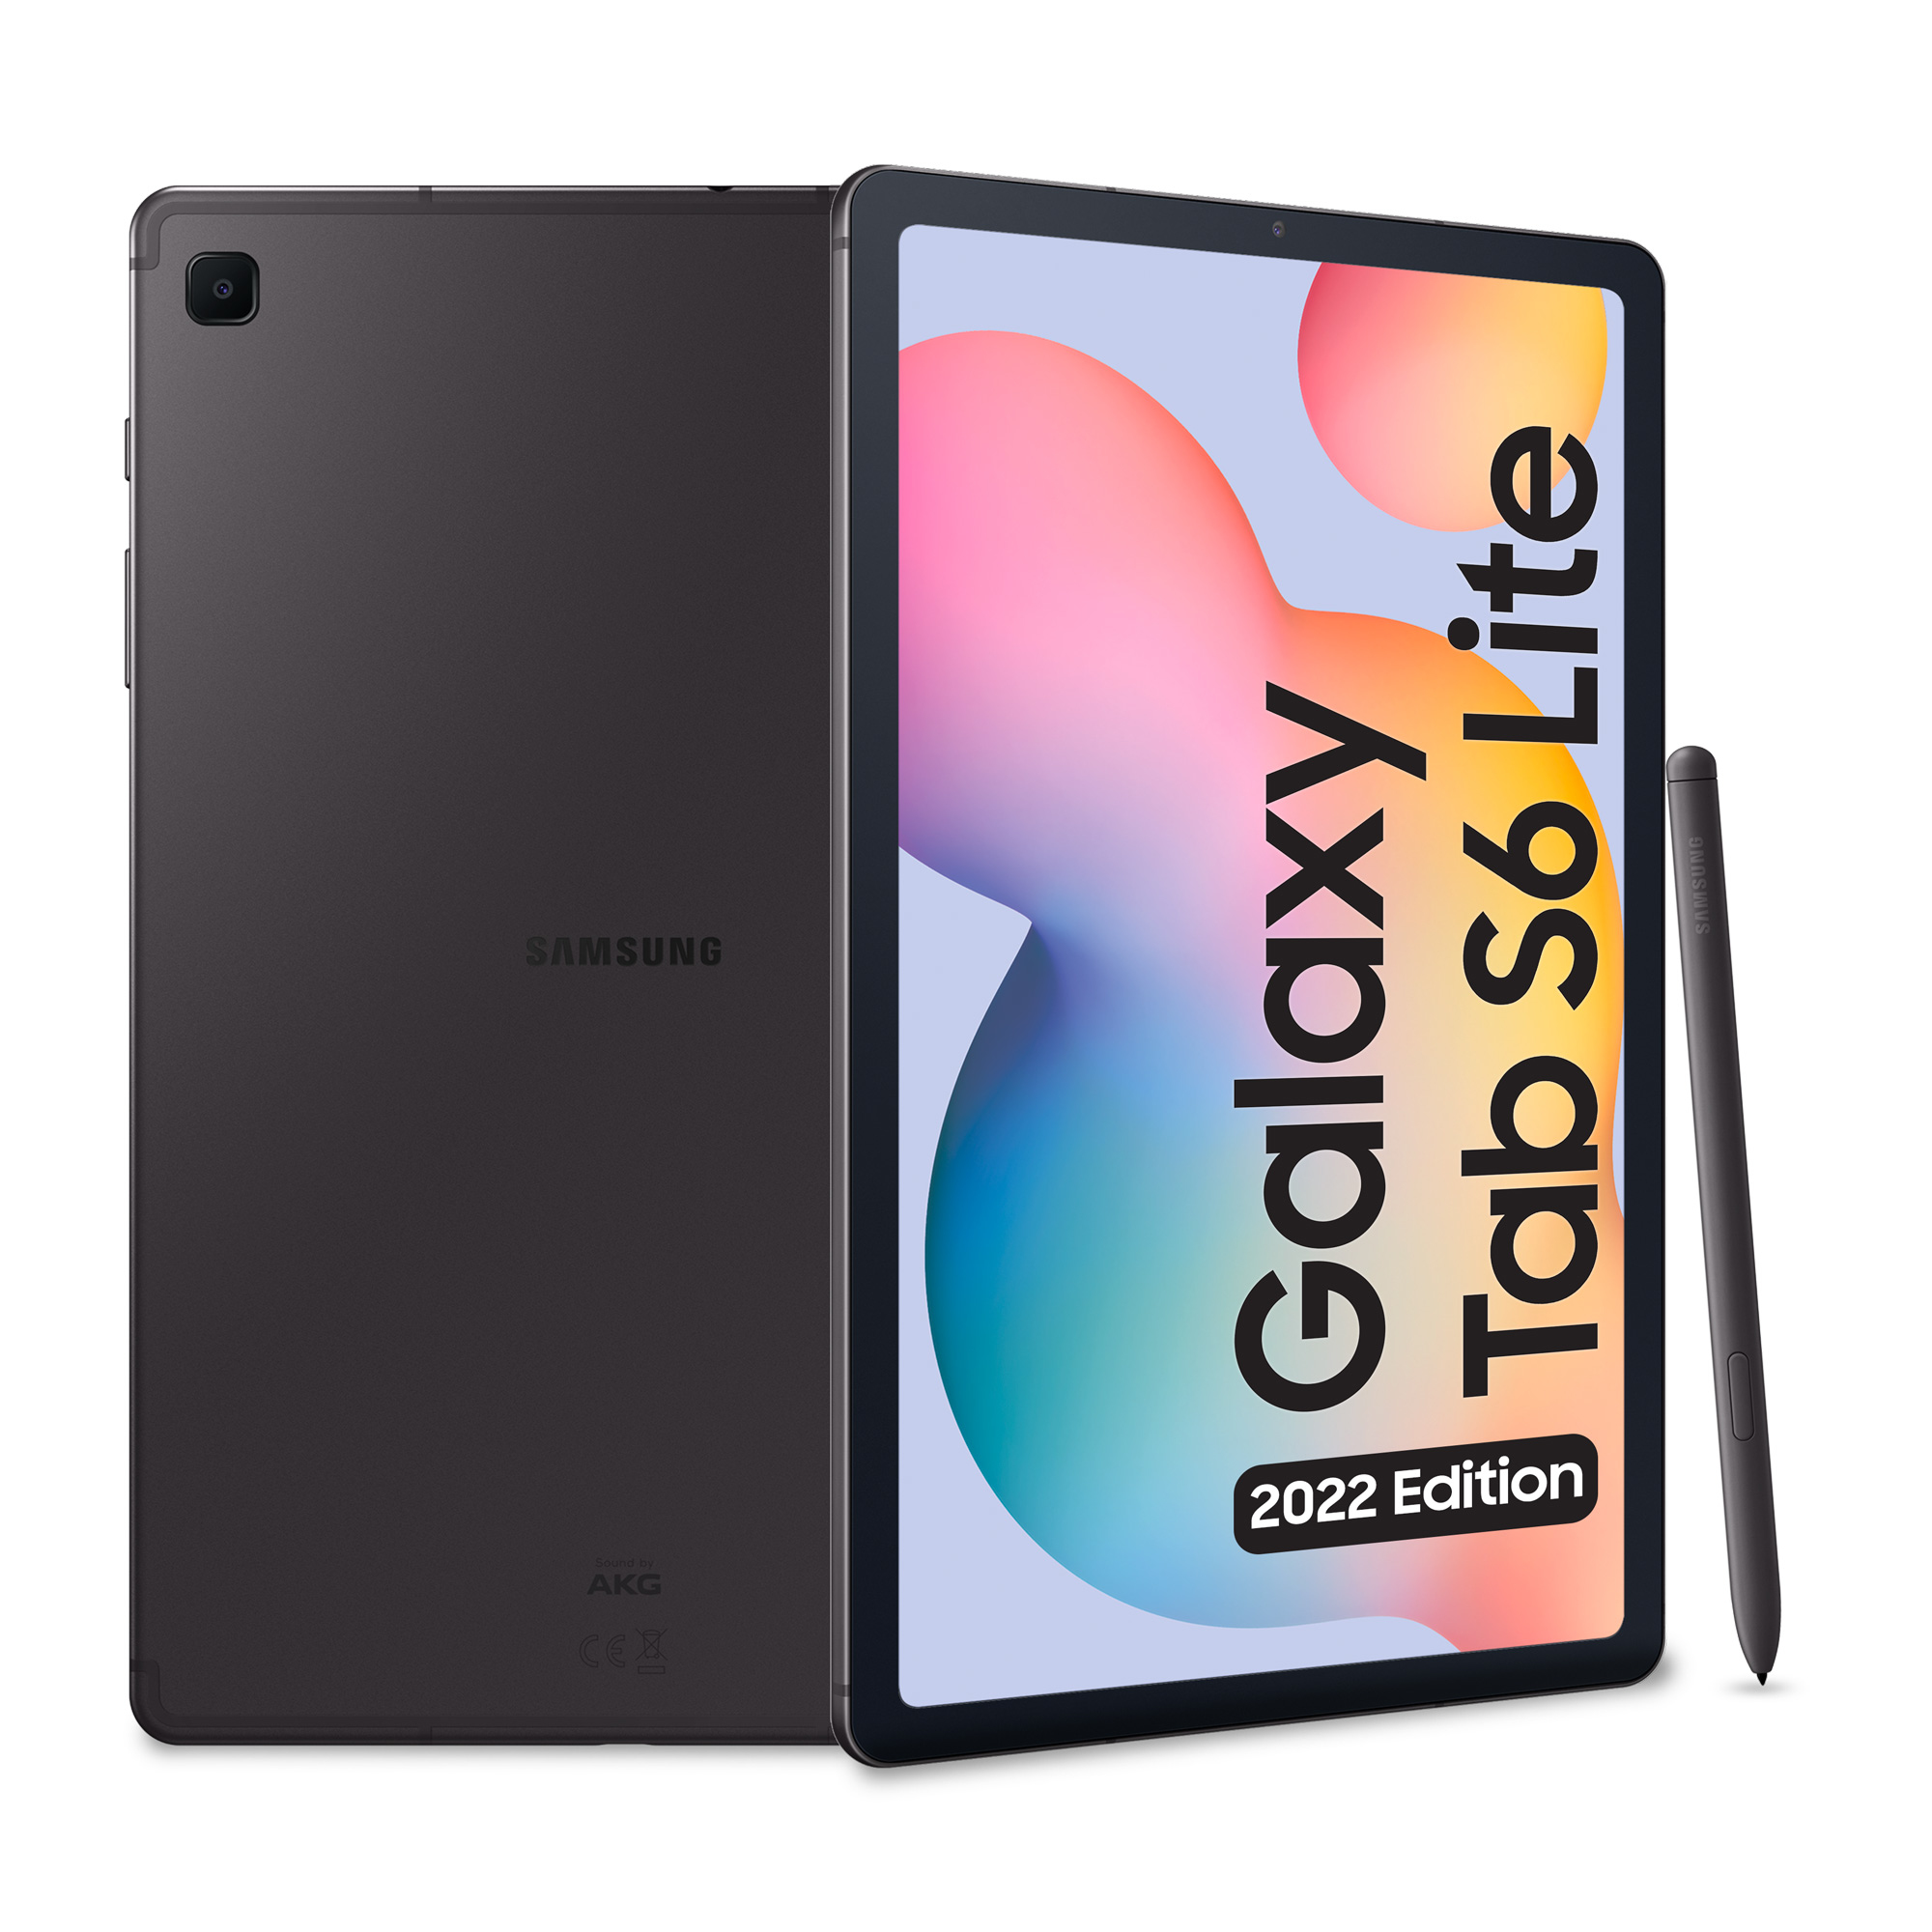 Image of Samsung Galaxy Tab S6 Lite (2022) Tablet Android 10.4 Pollici Wi-Fi RAM 4 GB, 64 GB espandibili Tablet Android 12 Oxford Gray